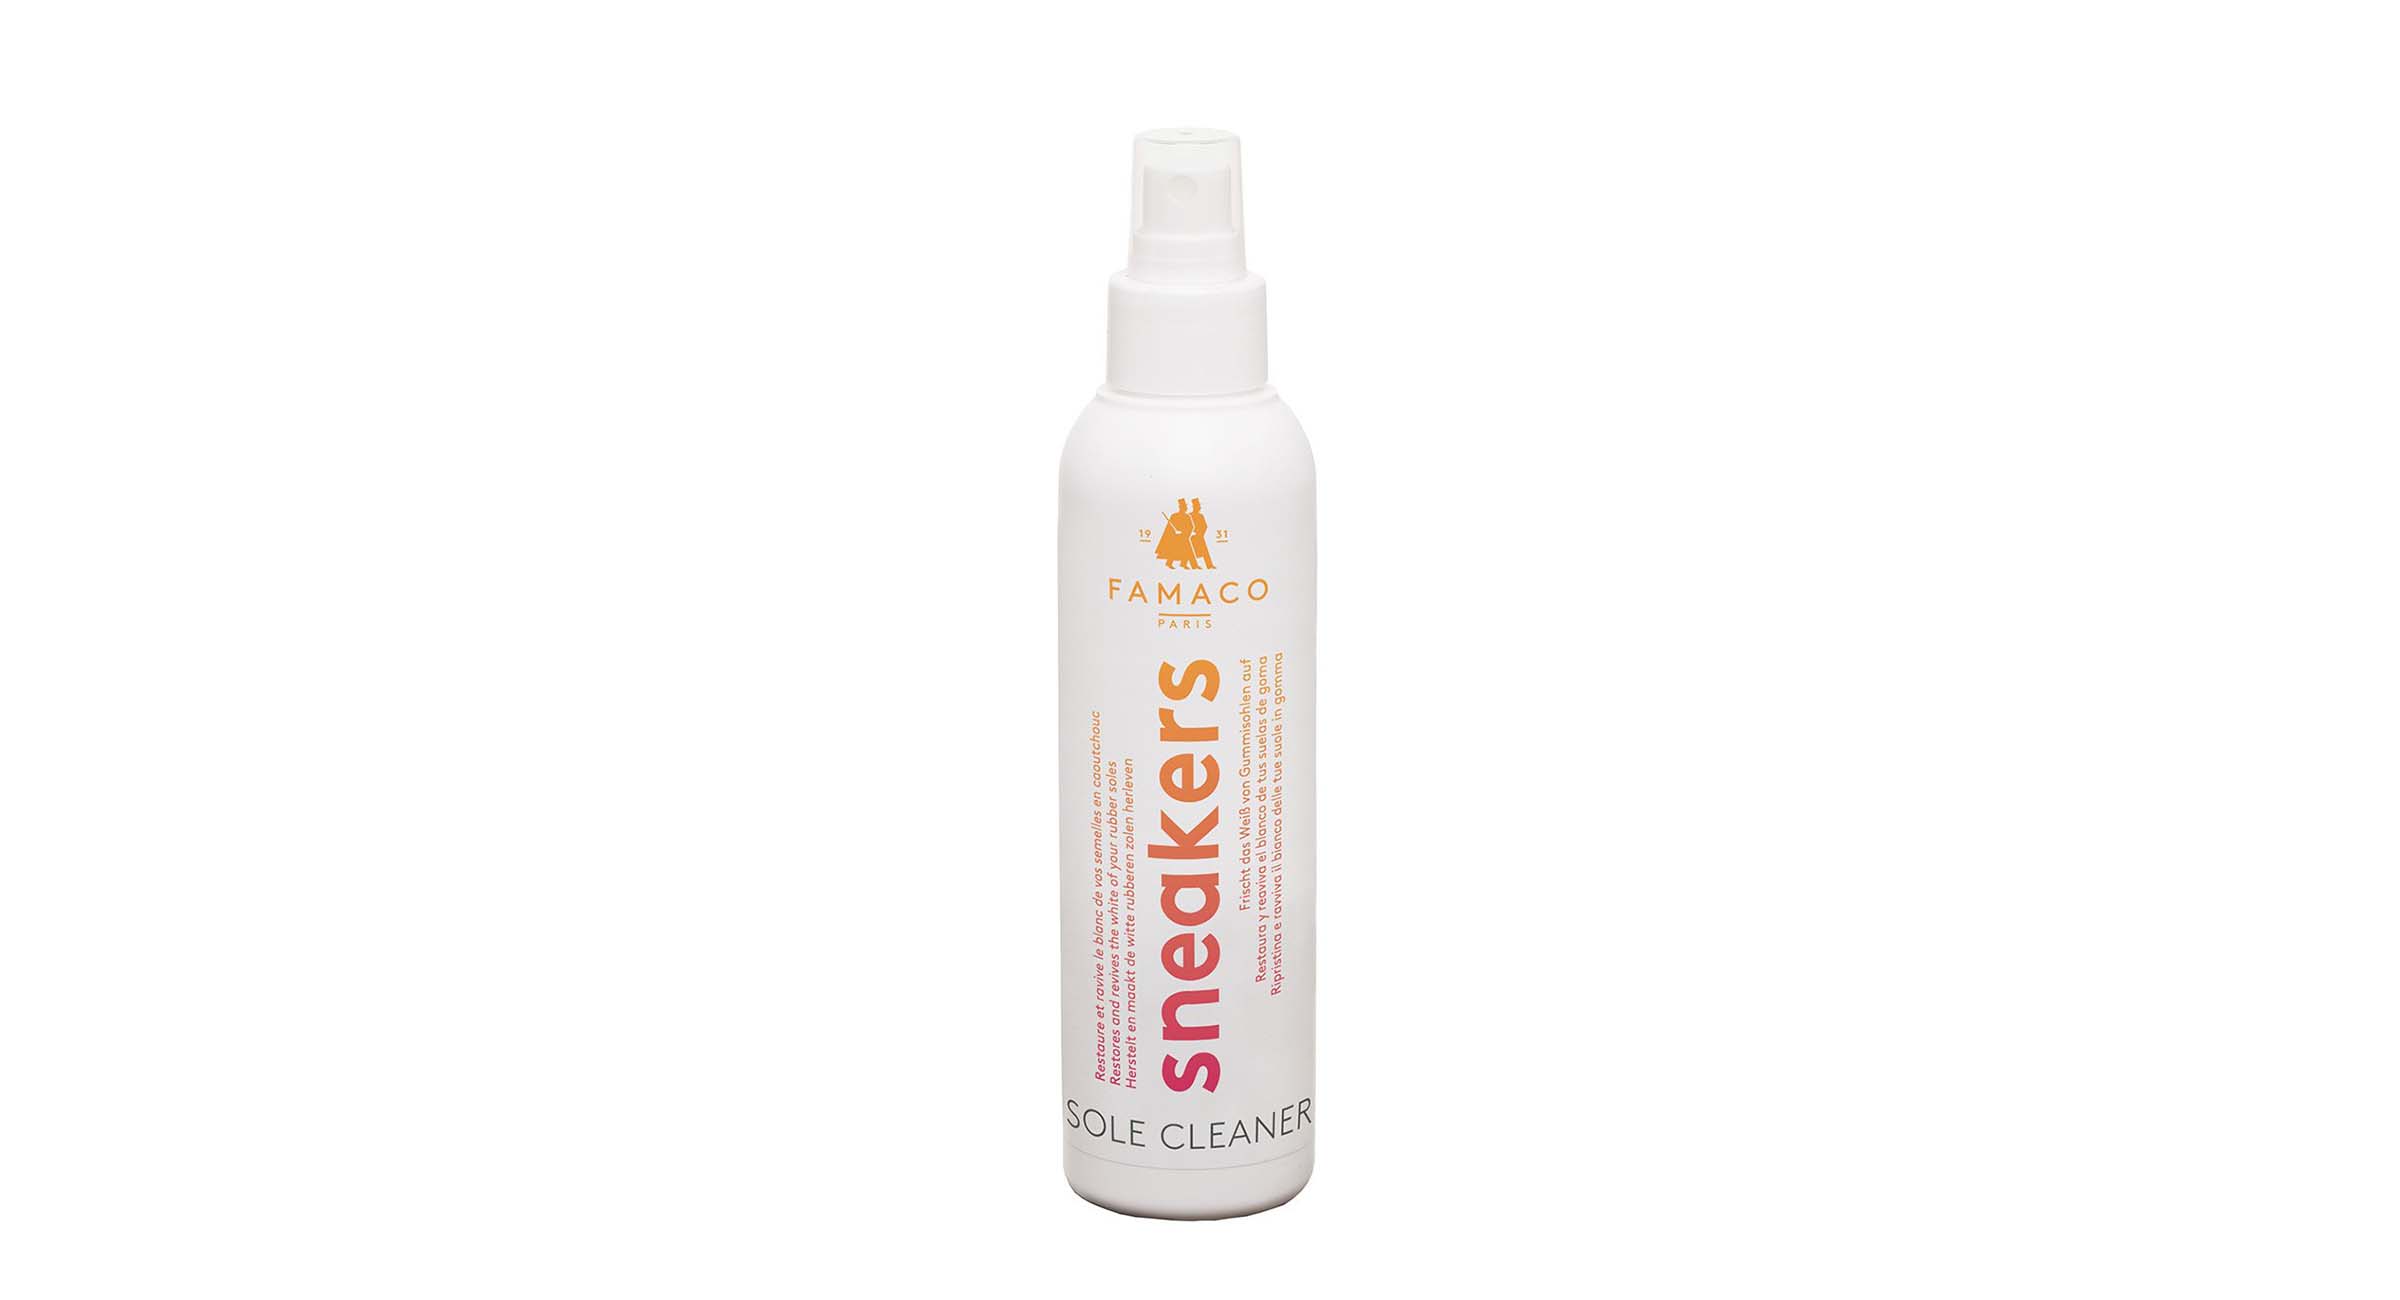 White Sneaker Cleaner – Save Your Sole